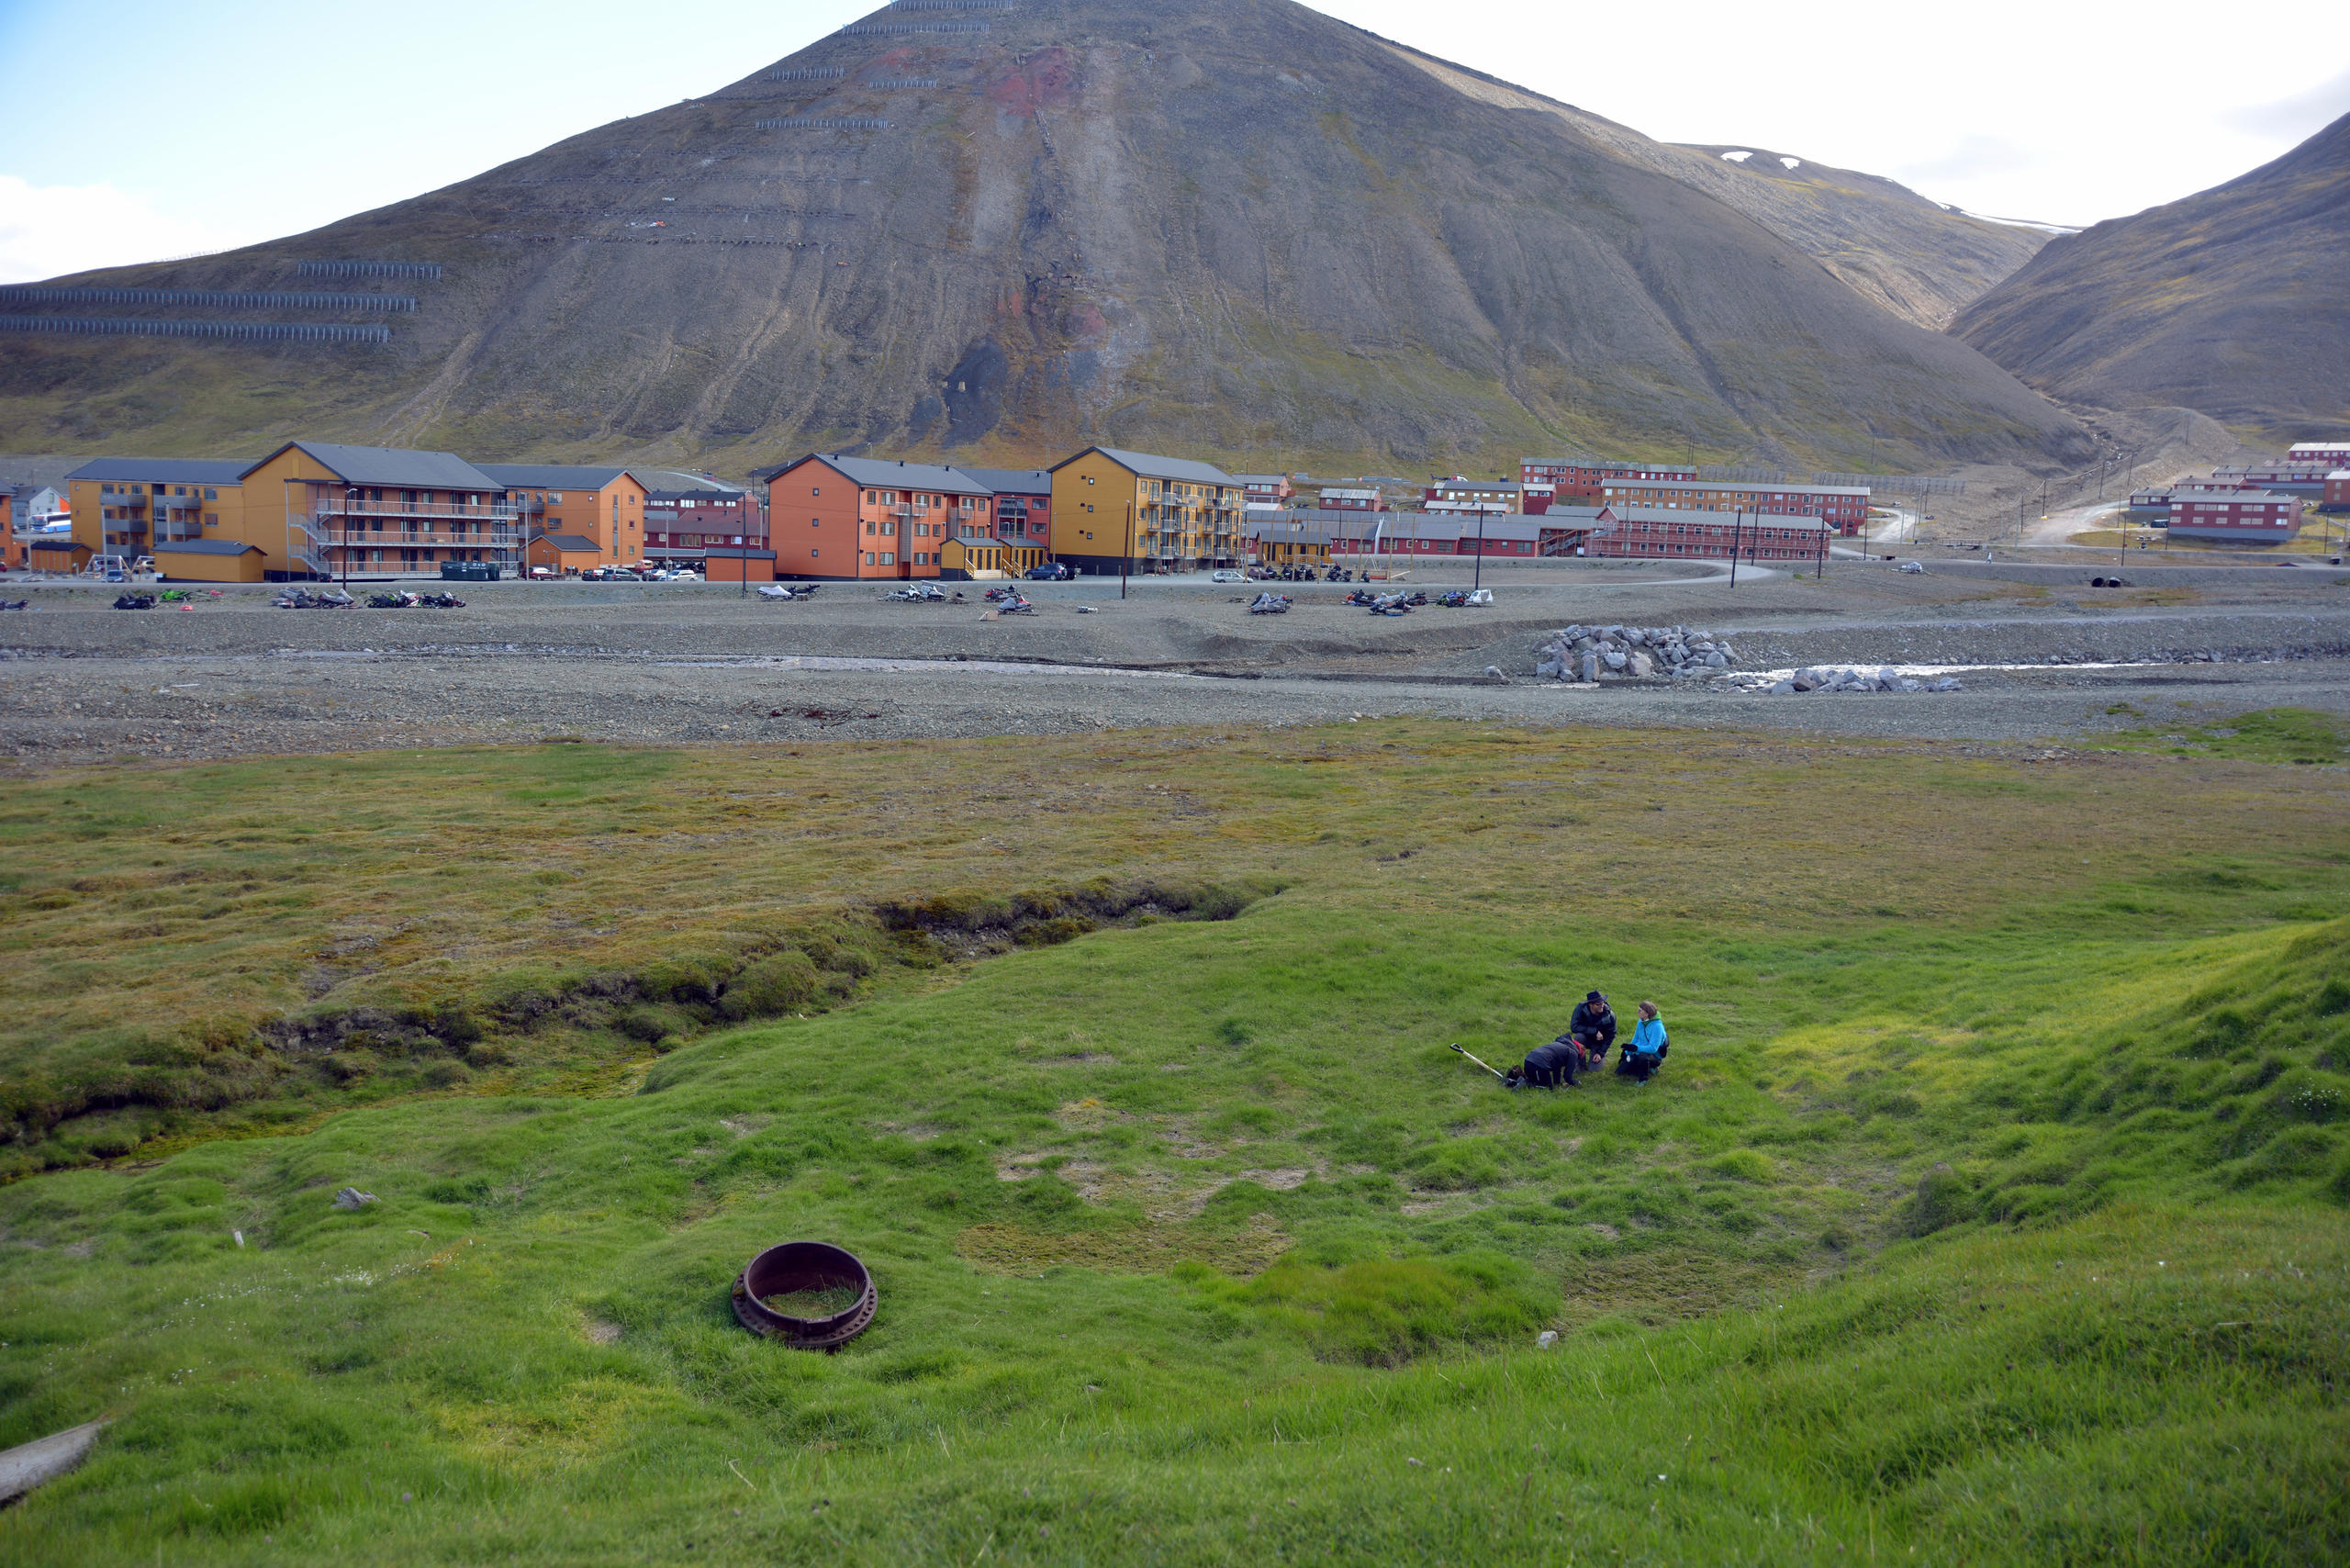 View from our site in Longyearbyen, representative of disturbed soils and vegetation close to settlements